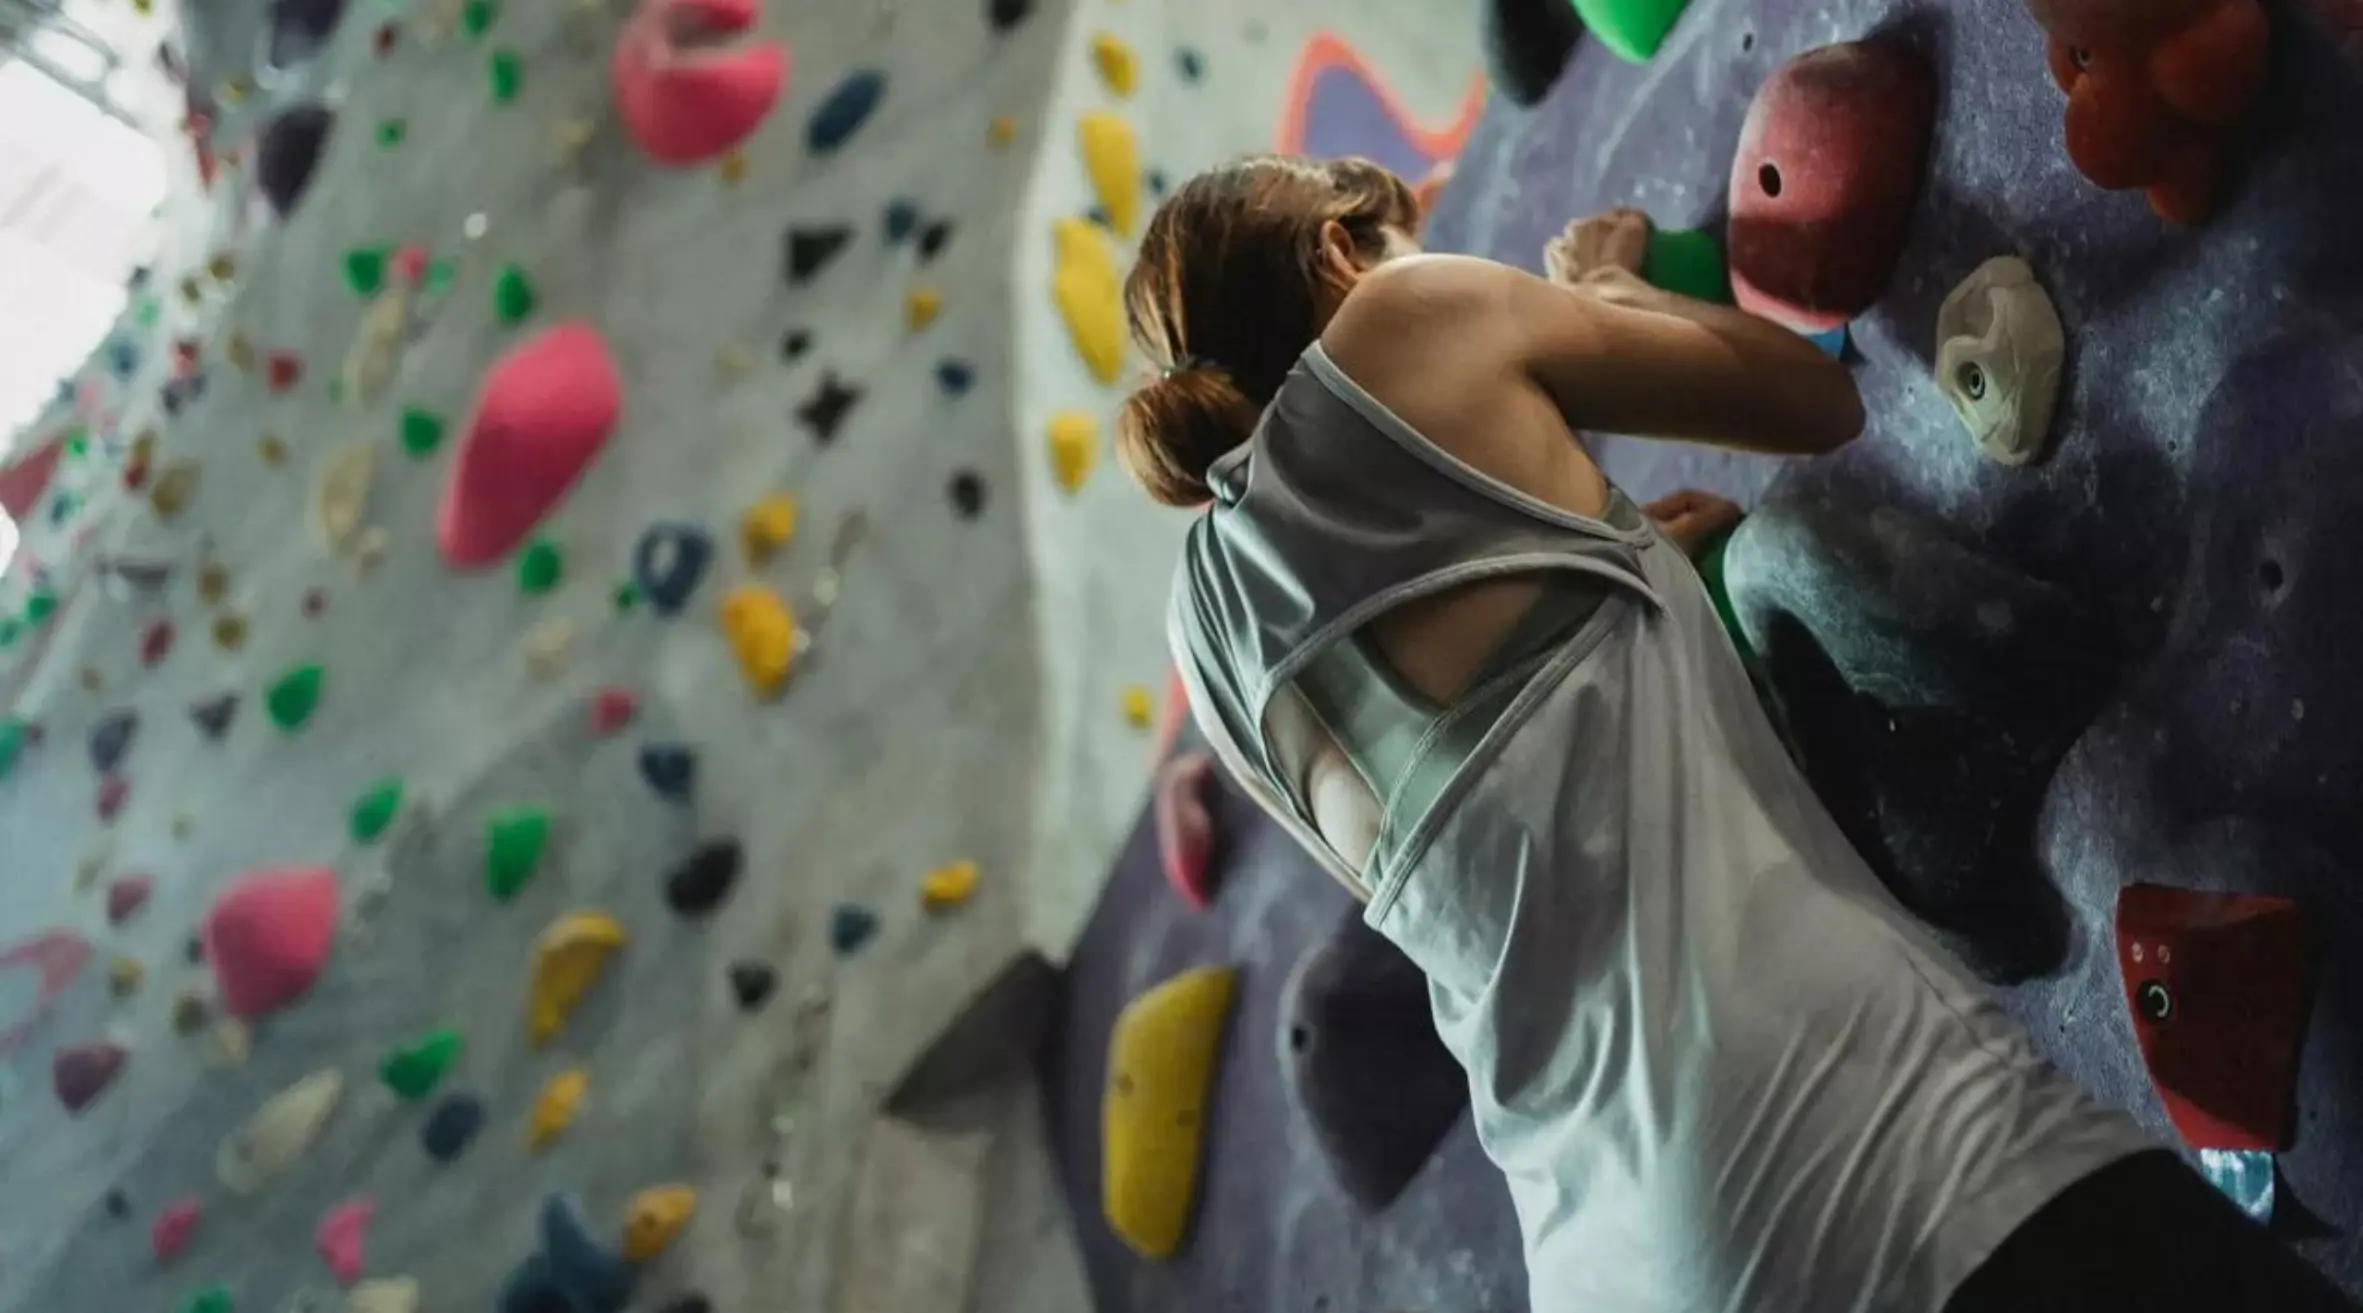 Rhino Boulder Gym Belgium's Largest Bouldering Facility Opening in Ghent